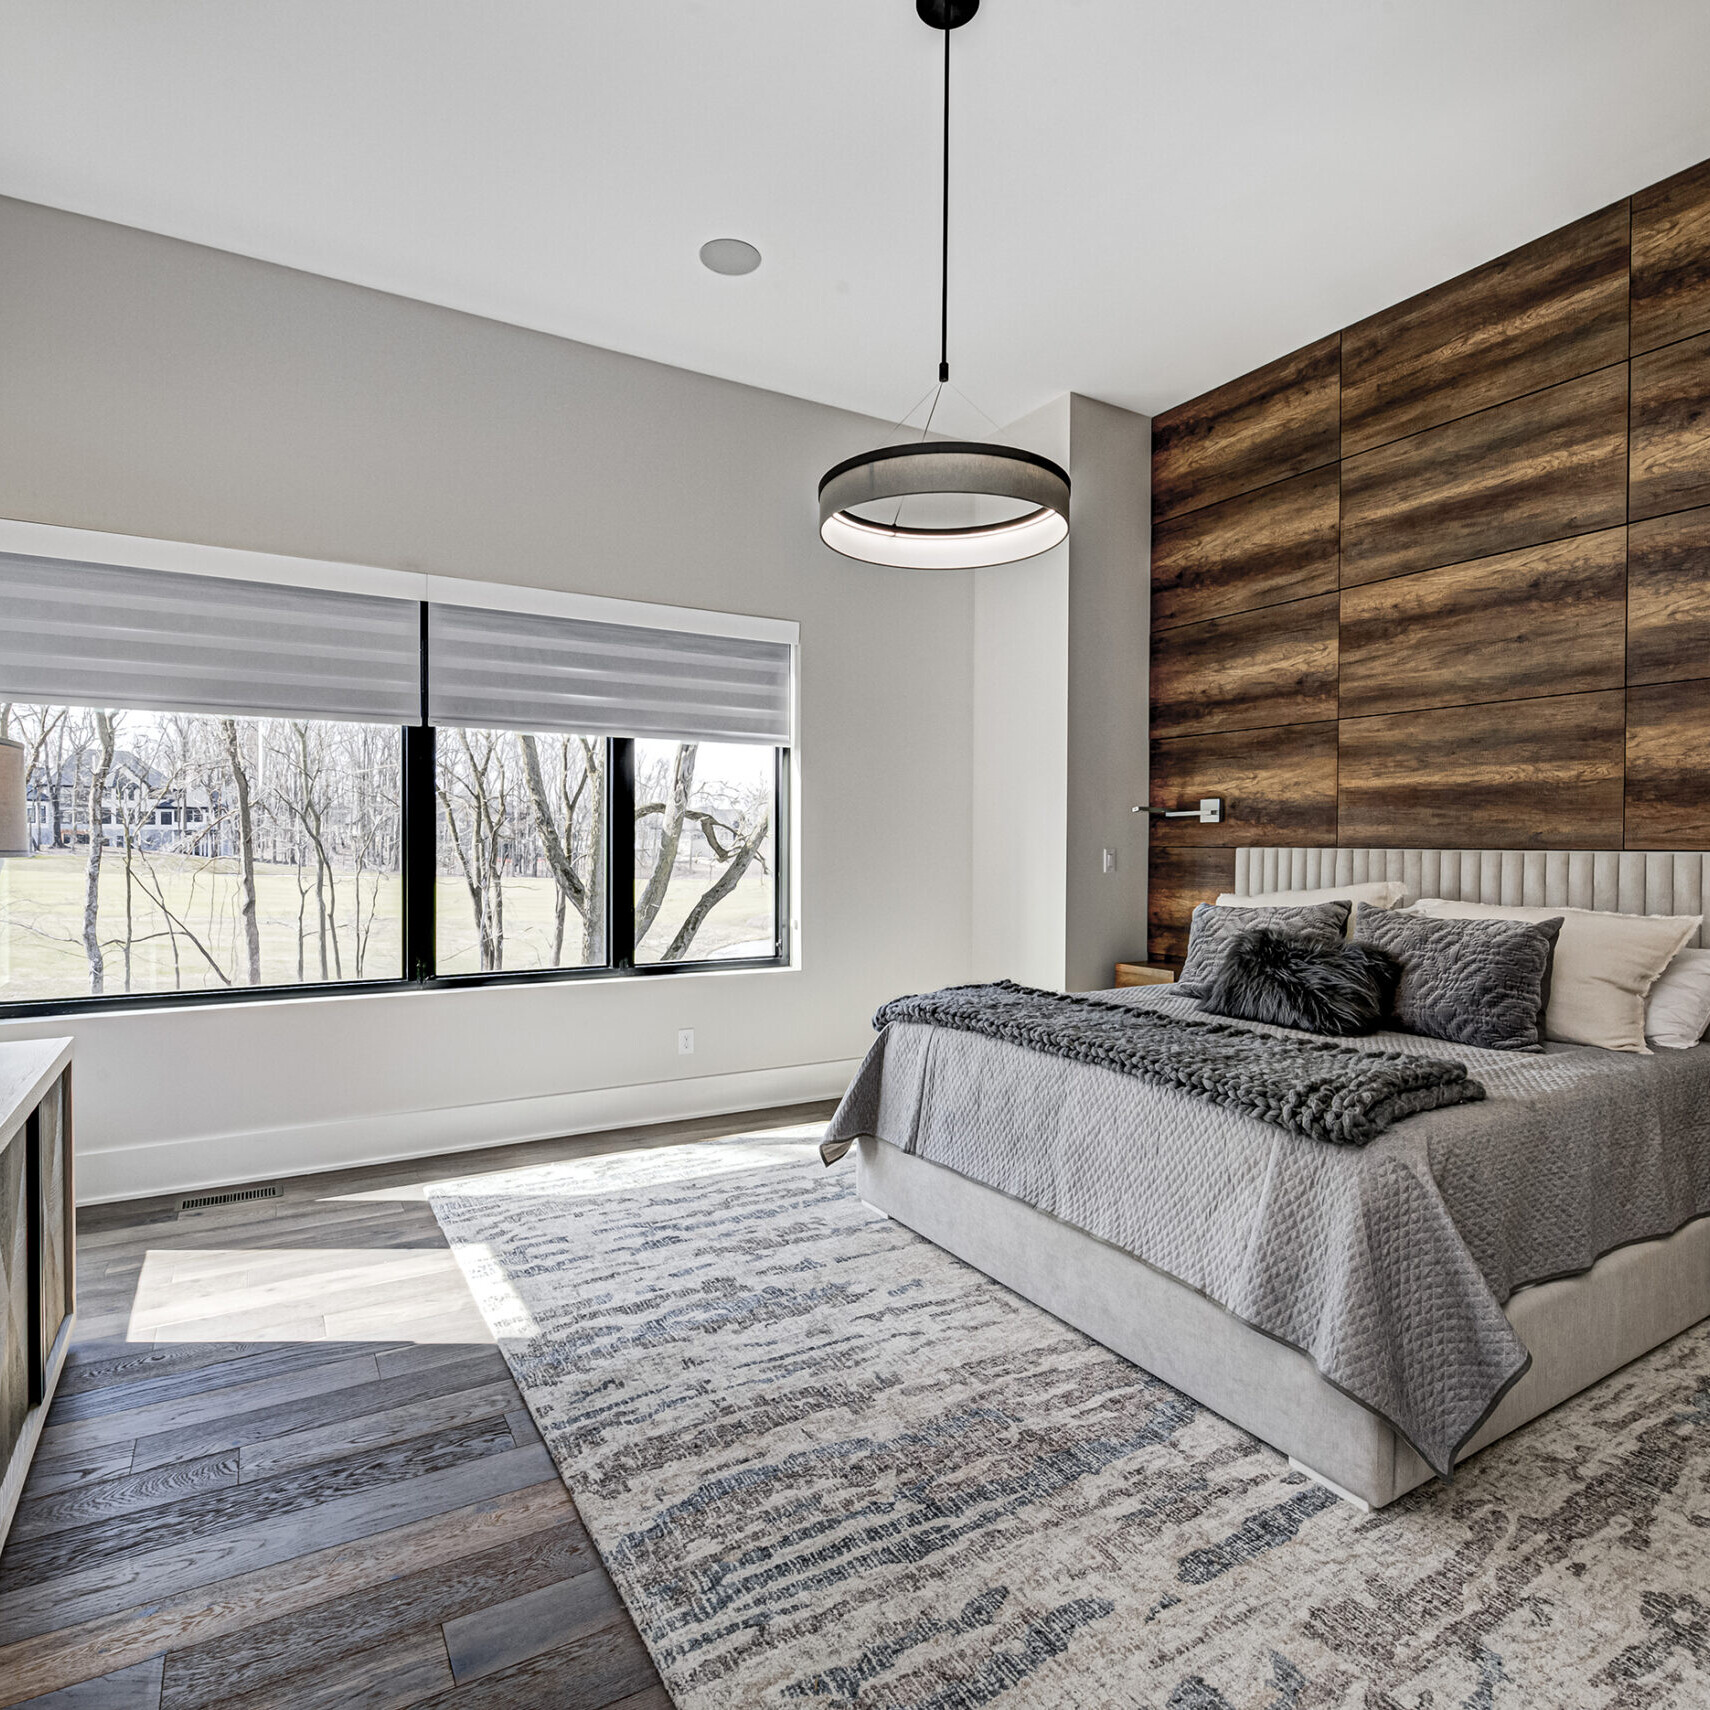 A modern bedroom with wood paneling and a bed.